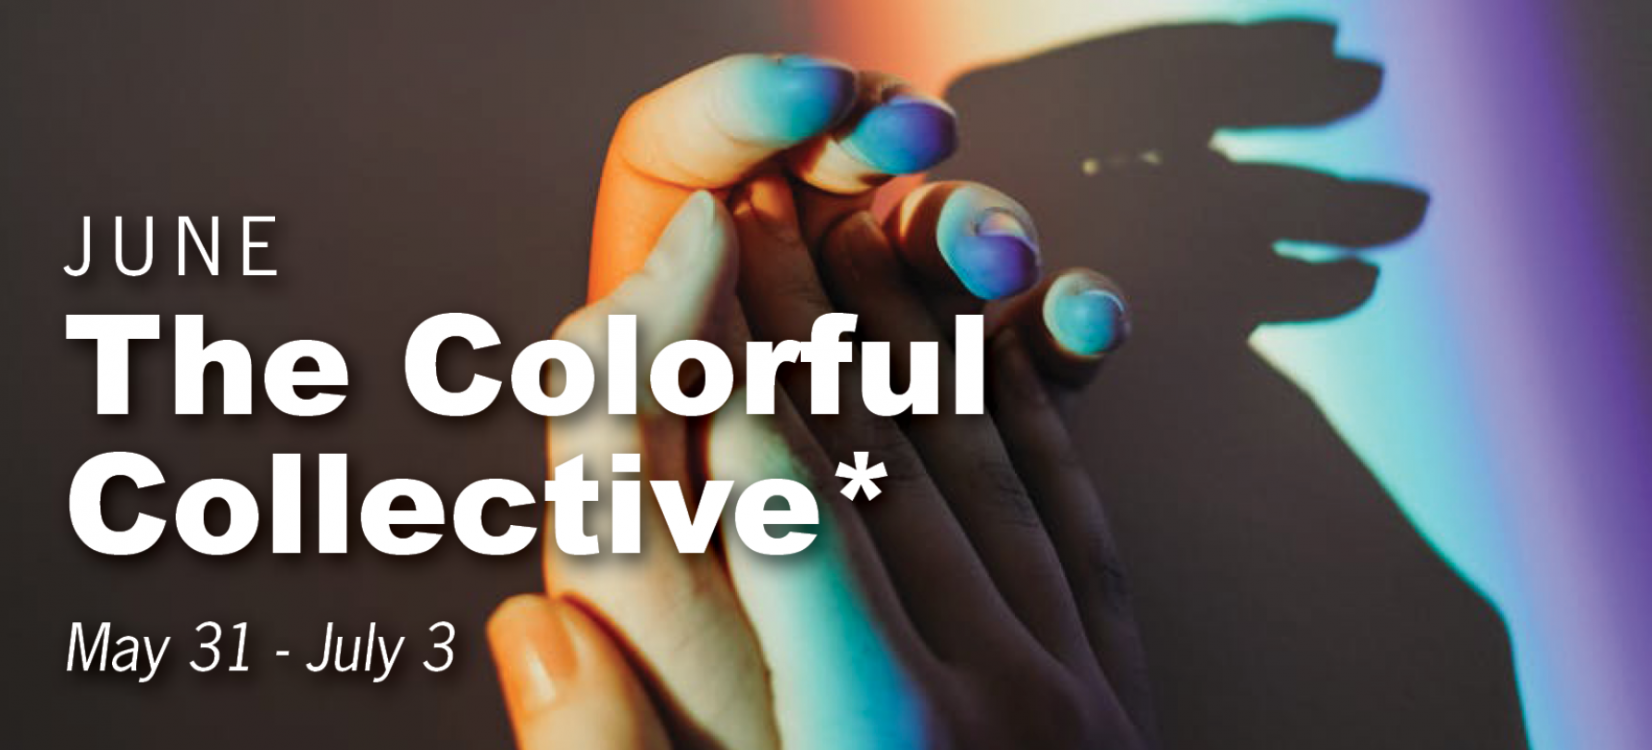 The Colorful Collective